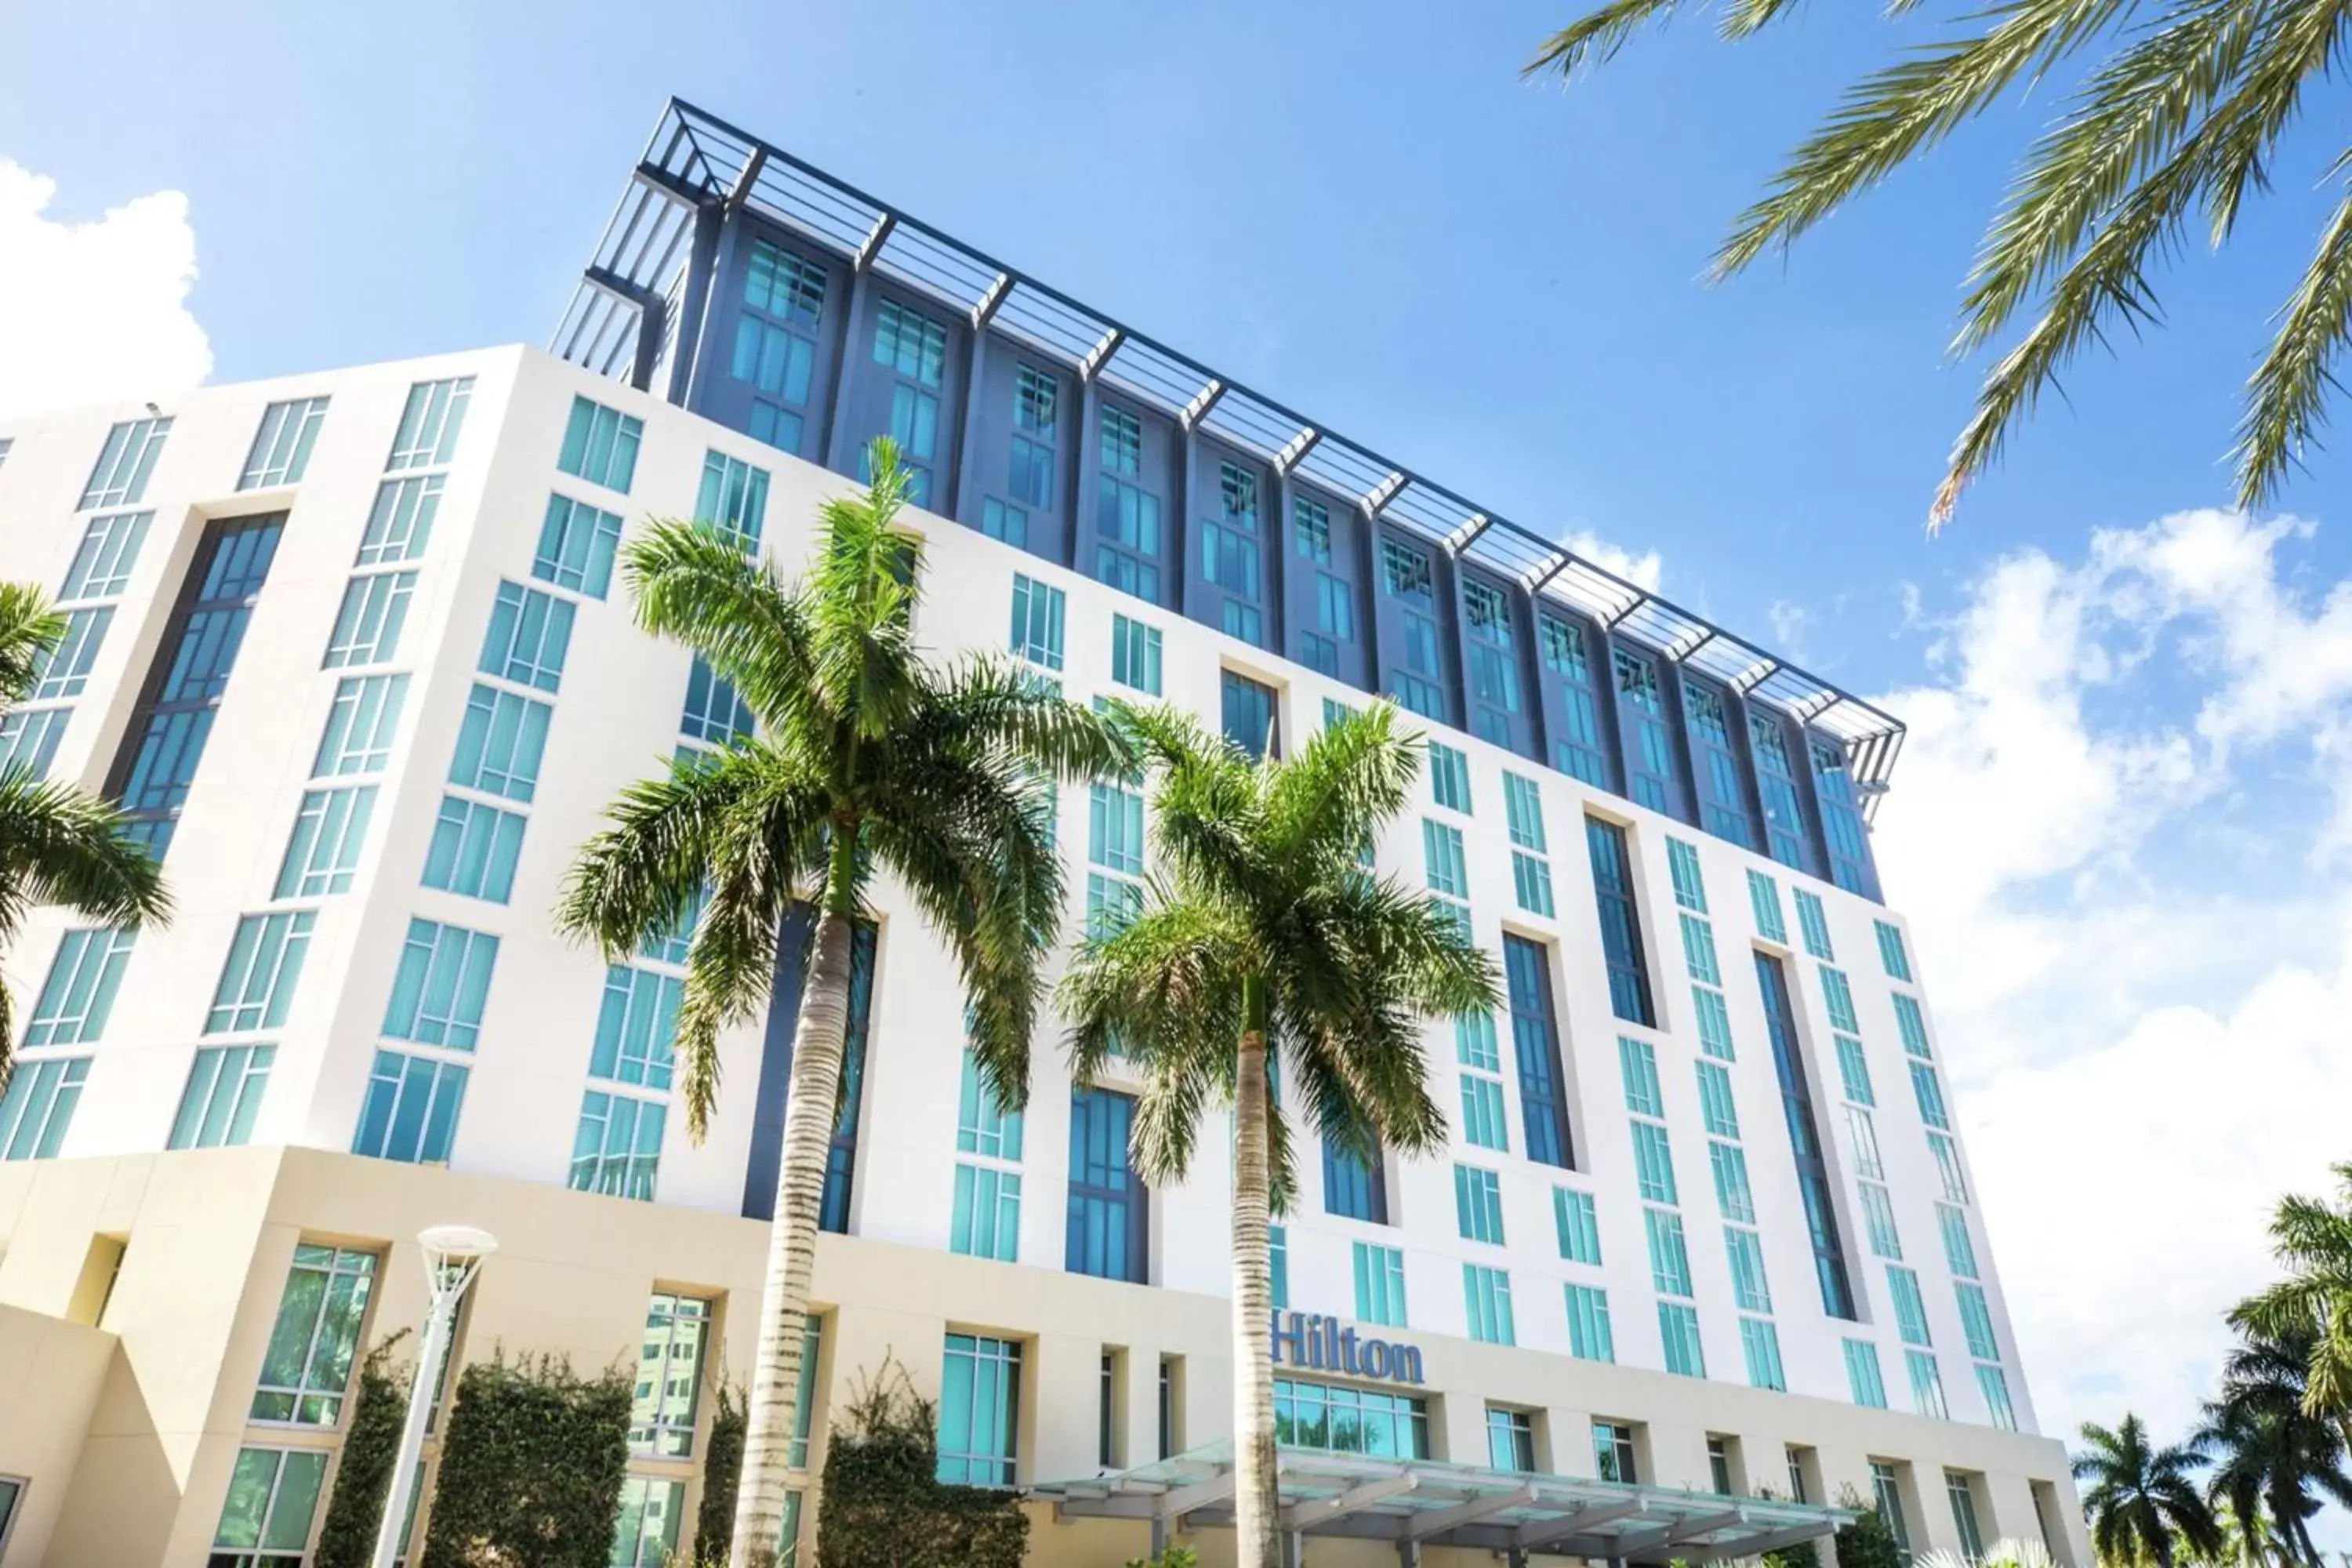 Property Building in Hilton West Palm Beach